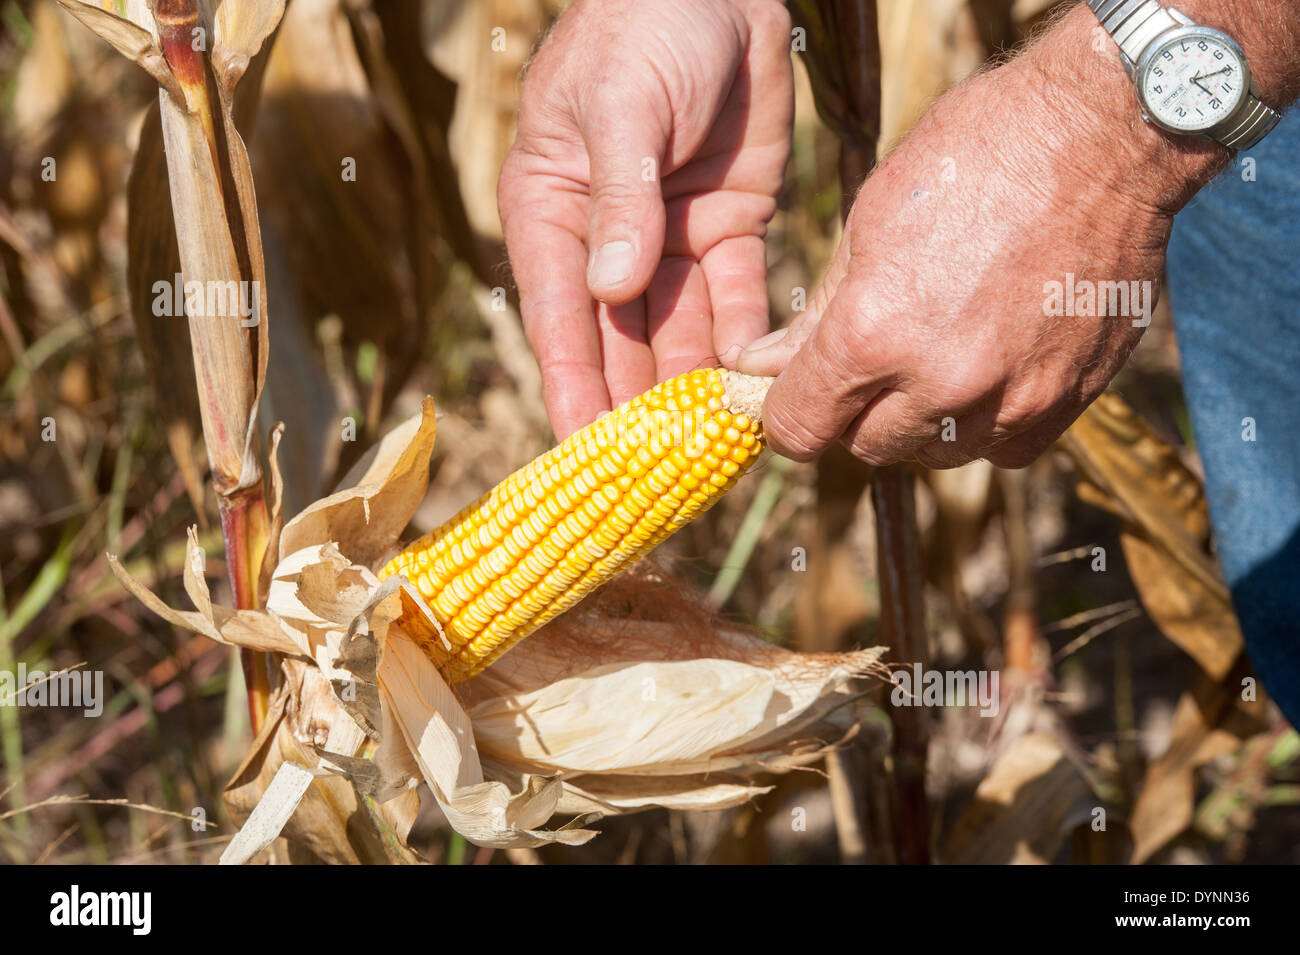 Hands with watch on wrist holding ear of field corn Gettysburg PA Stock Photo